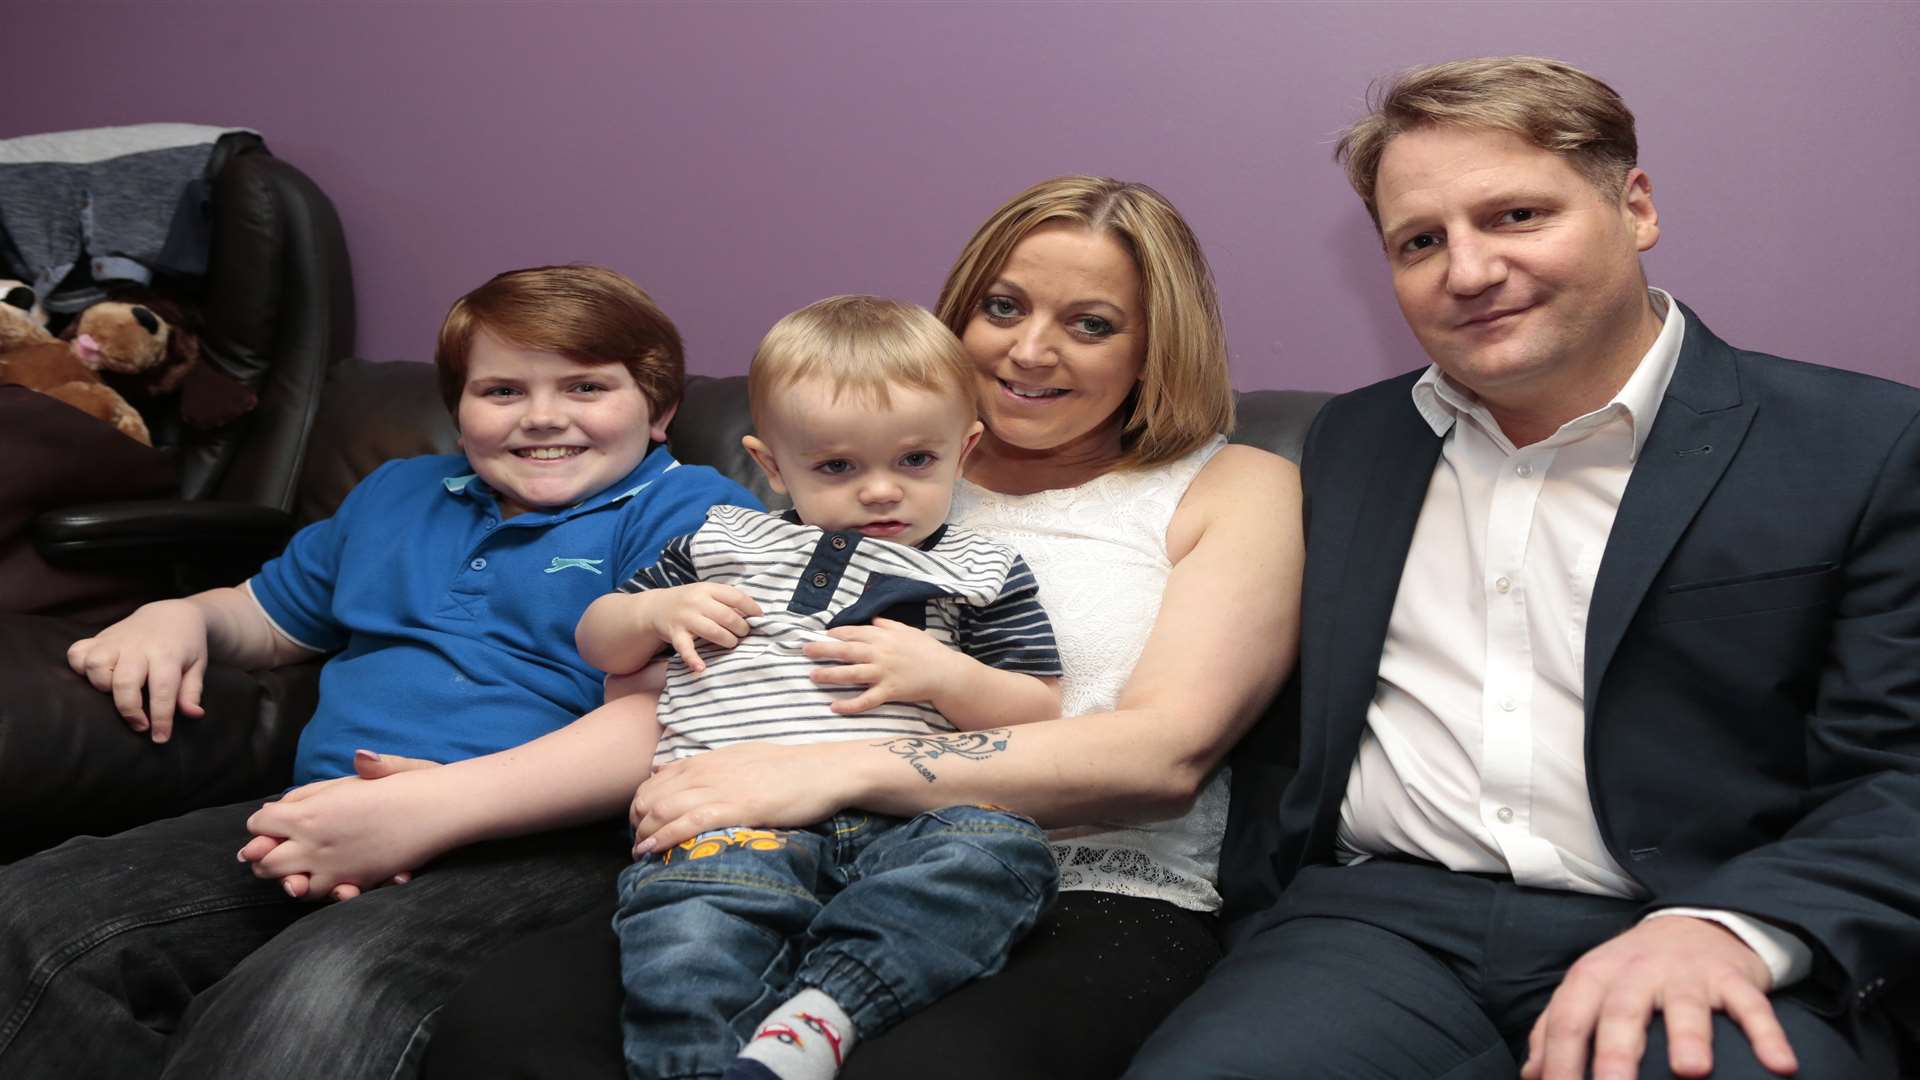 Rebecca Watts with her two sons, Alfie and Mason, and her boyfriend Richard Munn